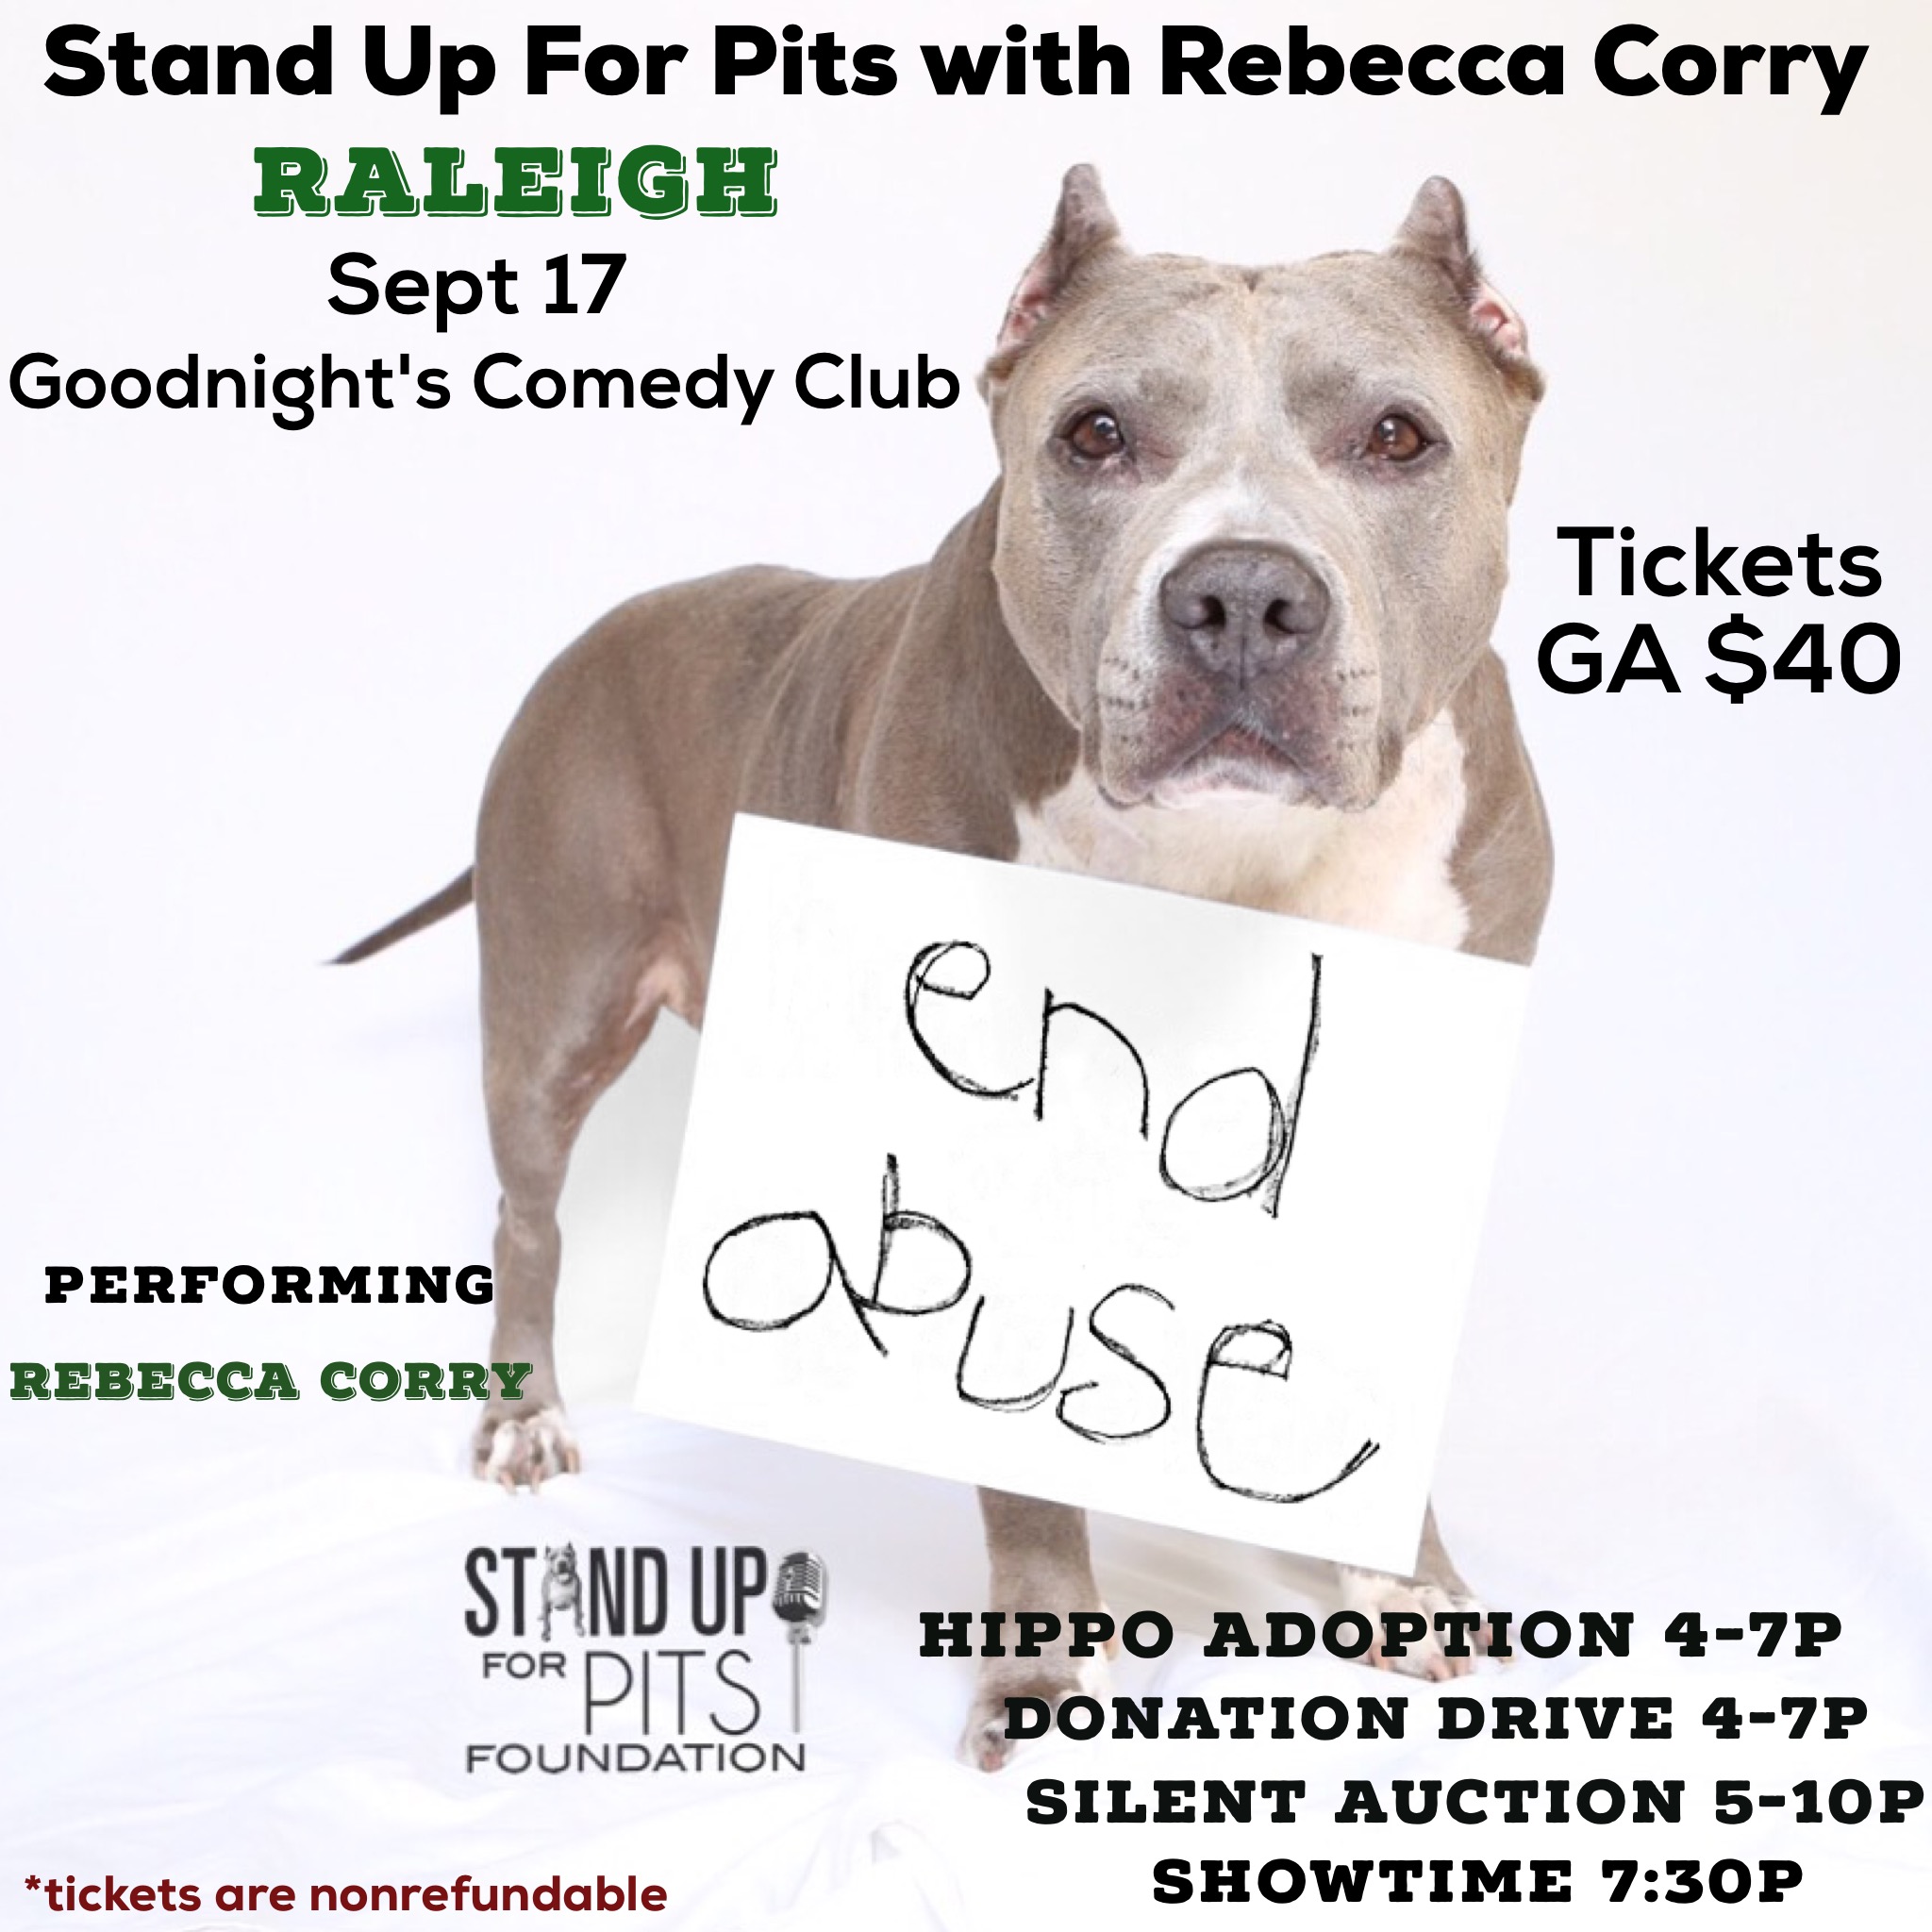 Stand Up For Pits RALEIGH tickets available NOW!!!